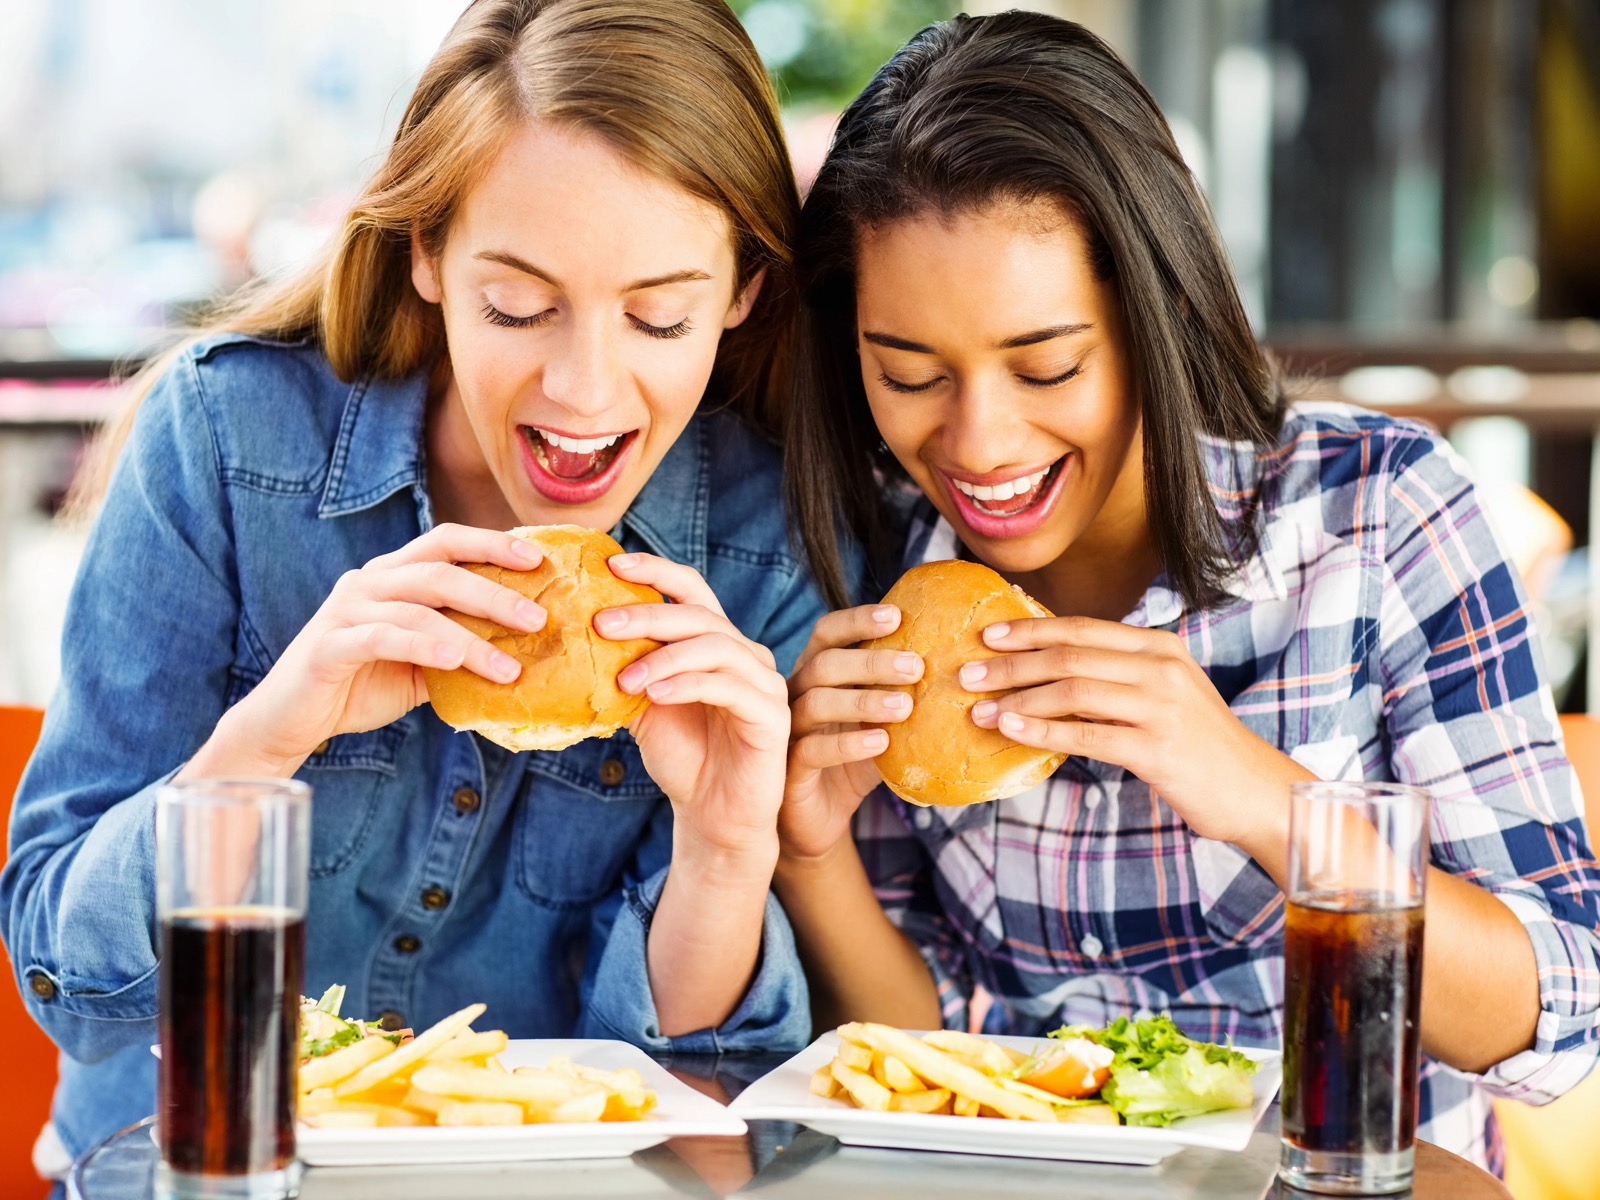 These Are the 32 Worst Foods in the Human Diet, According to AI – How Many Have You Eaten Recently? Teenagers eating burger fast food